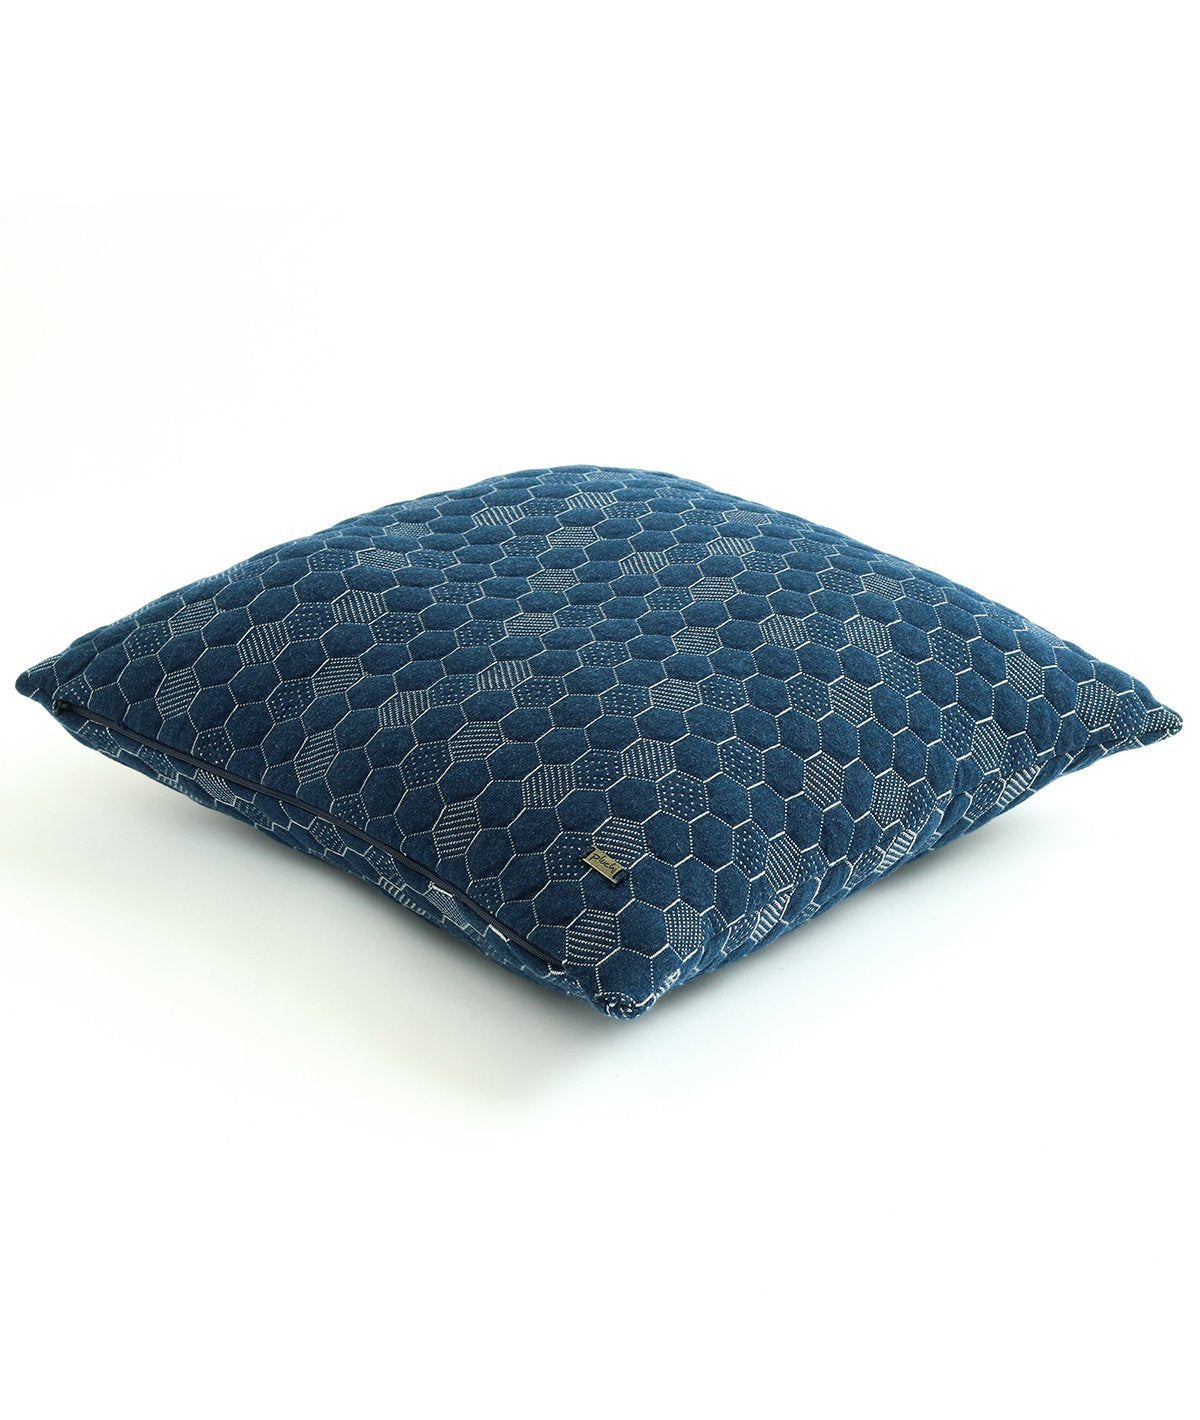 Pepin Cotton Knitted Decorative Estate Blue & Natural Color 18 x 18 Inches Cushion Cover